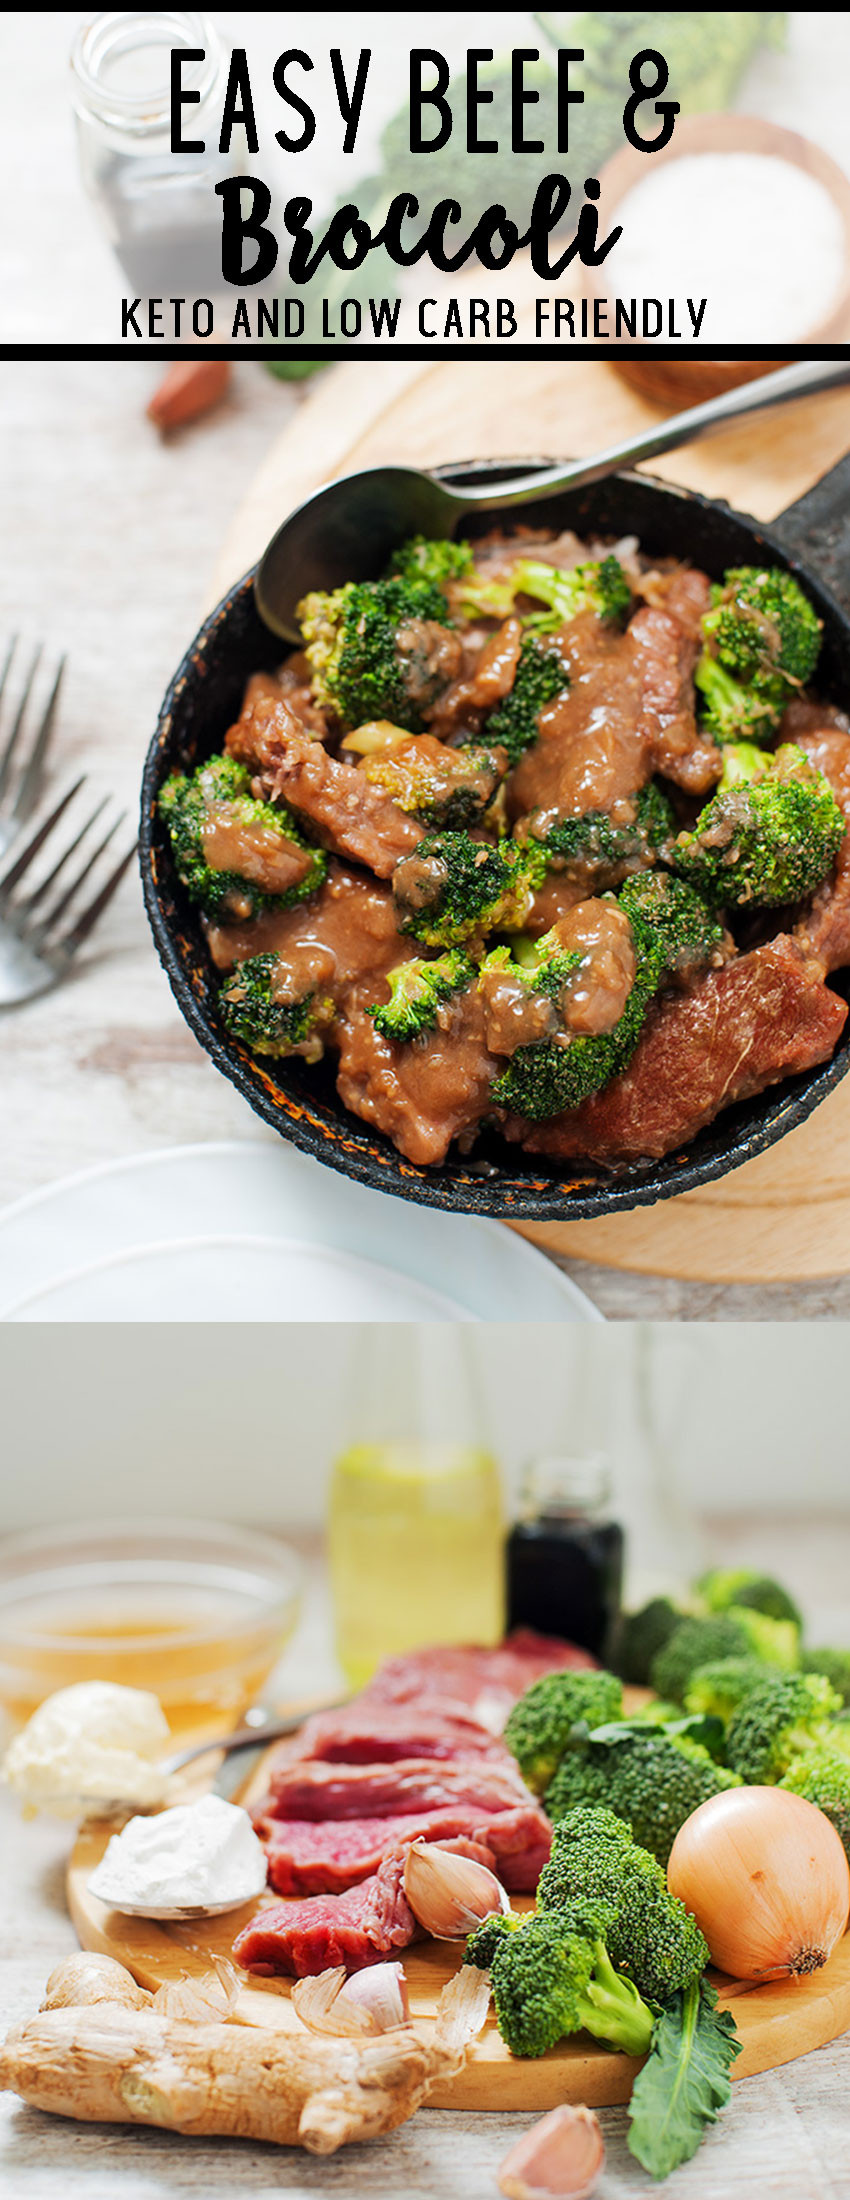 Beef And Broccoli Keto
 Keto Beef and Broccoli Easy Peasy Meals